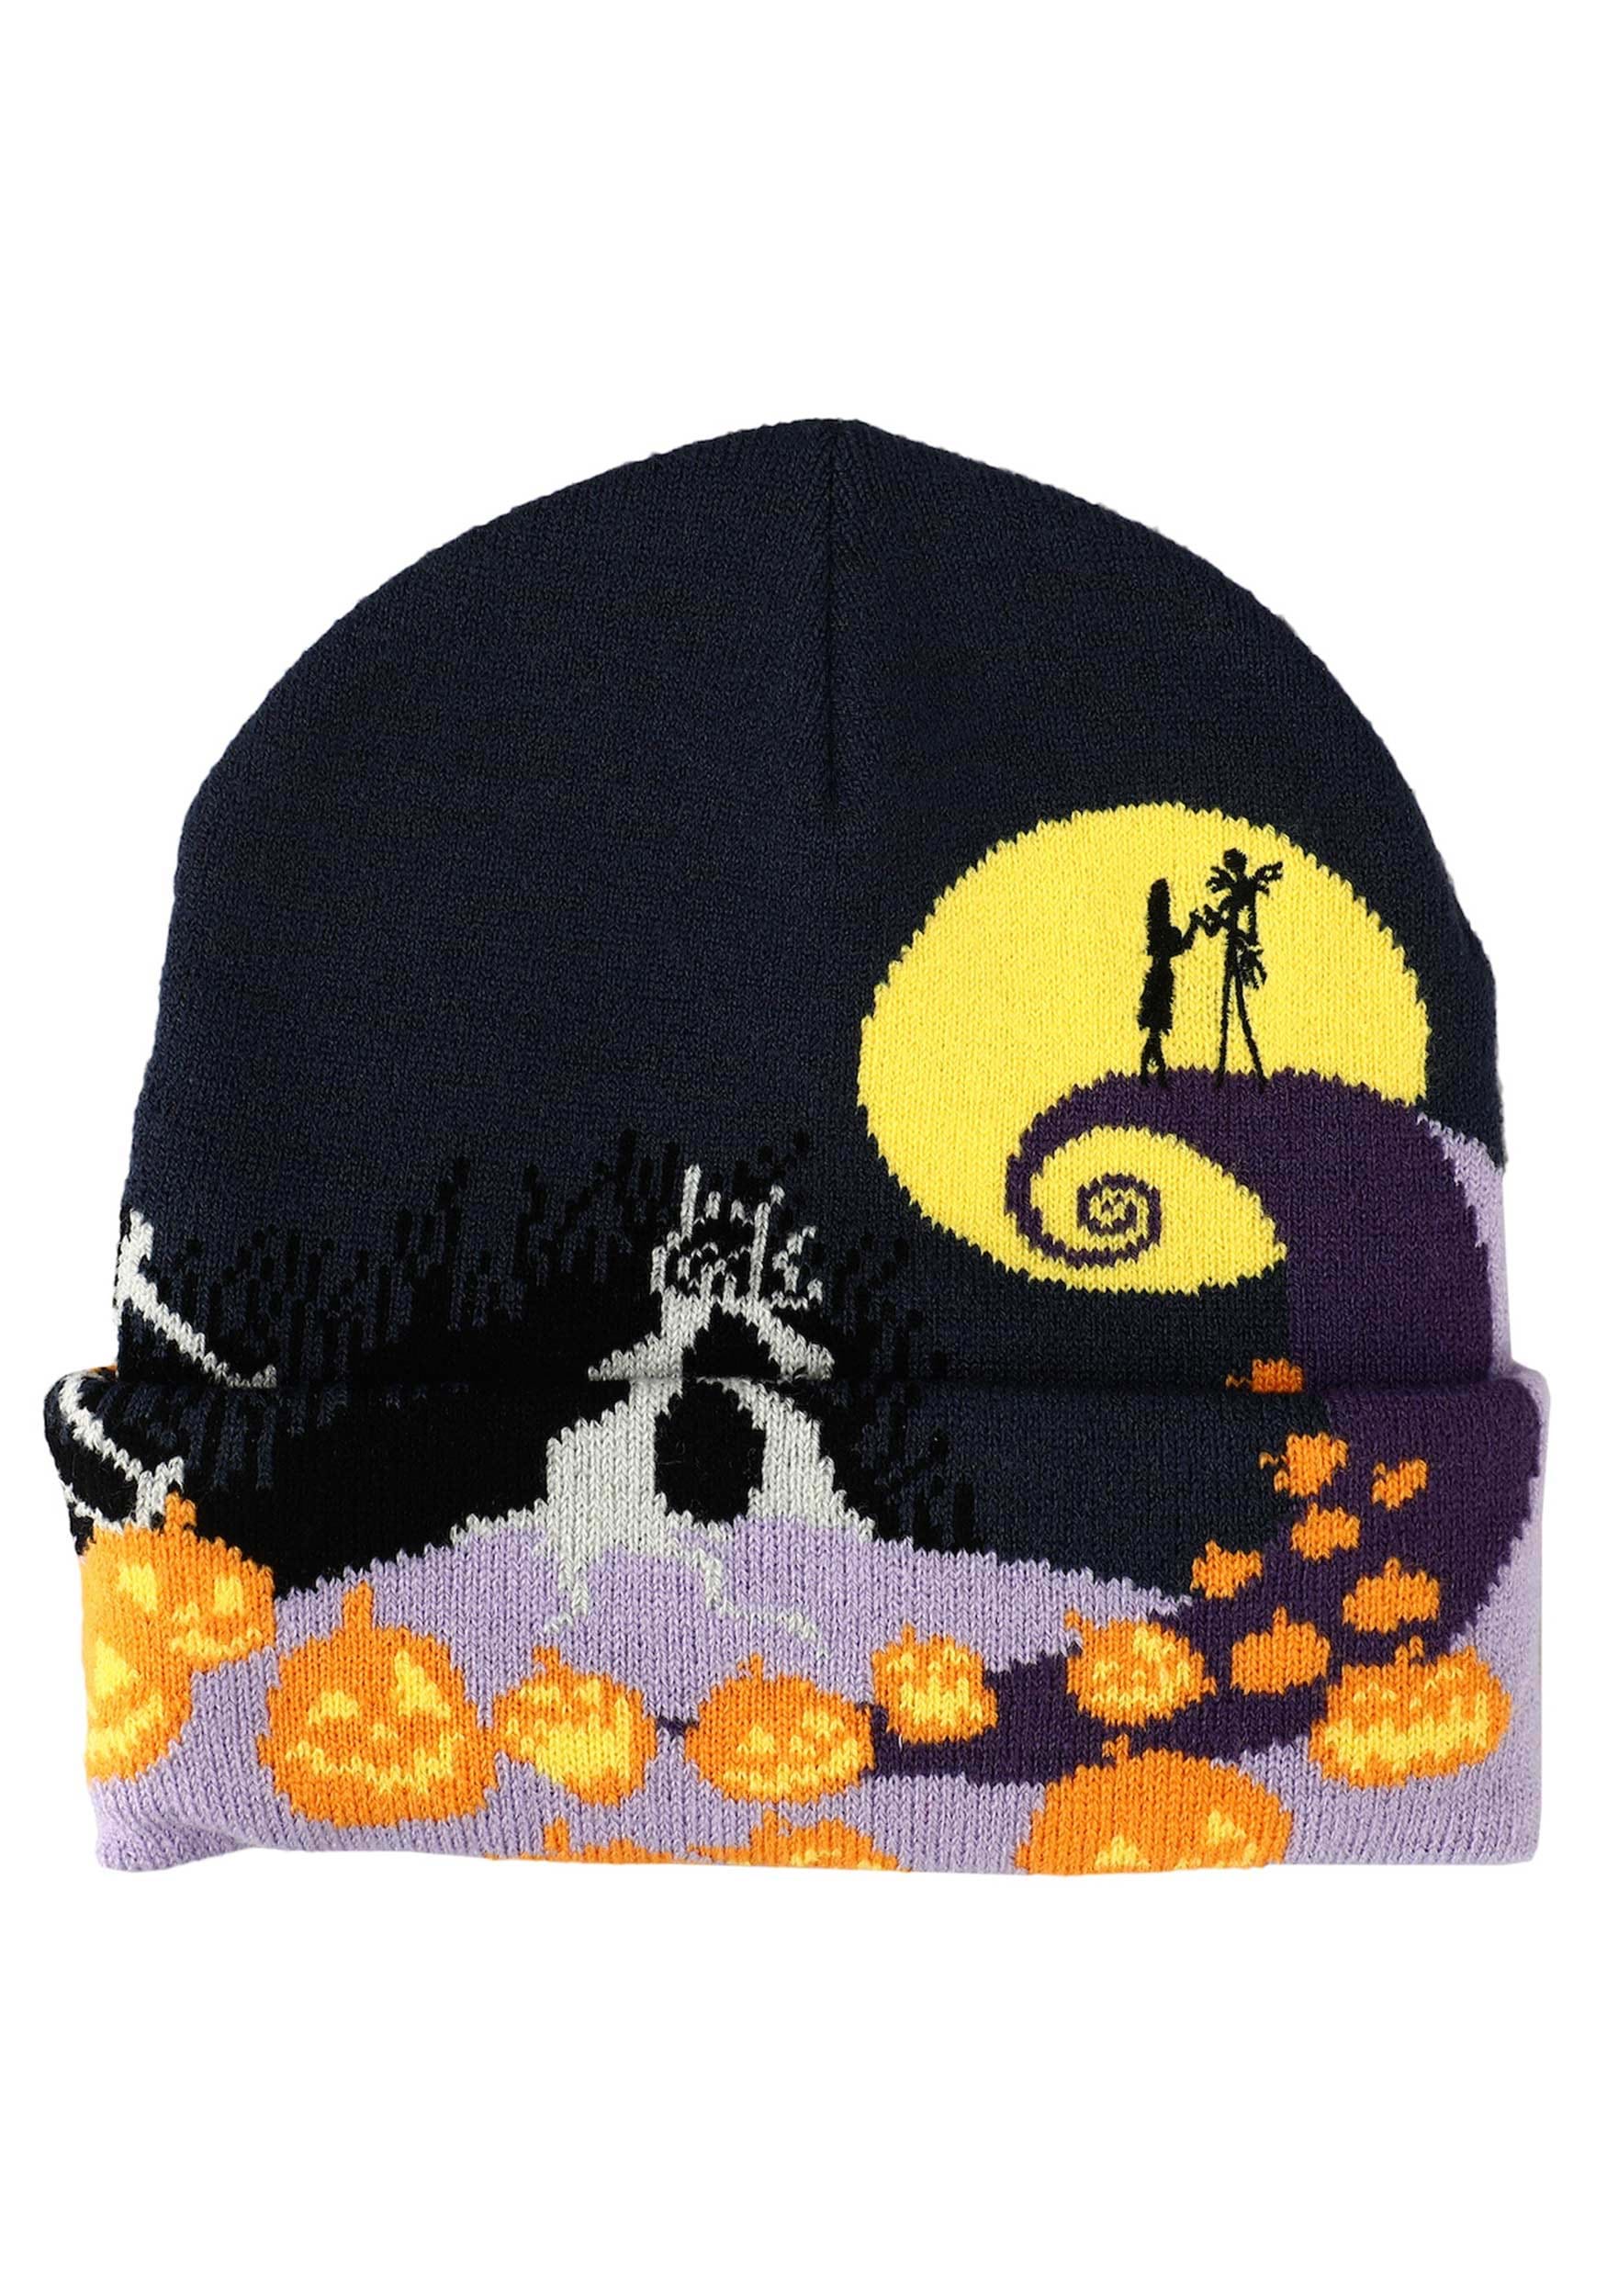 The Nightmare Before Christmas Landscape Beanie